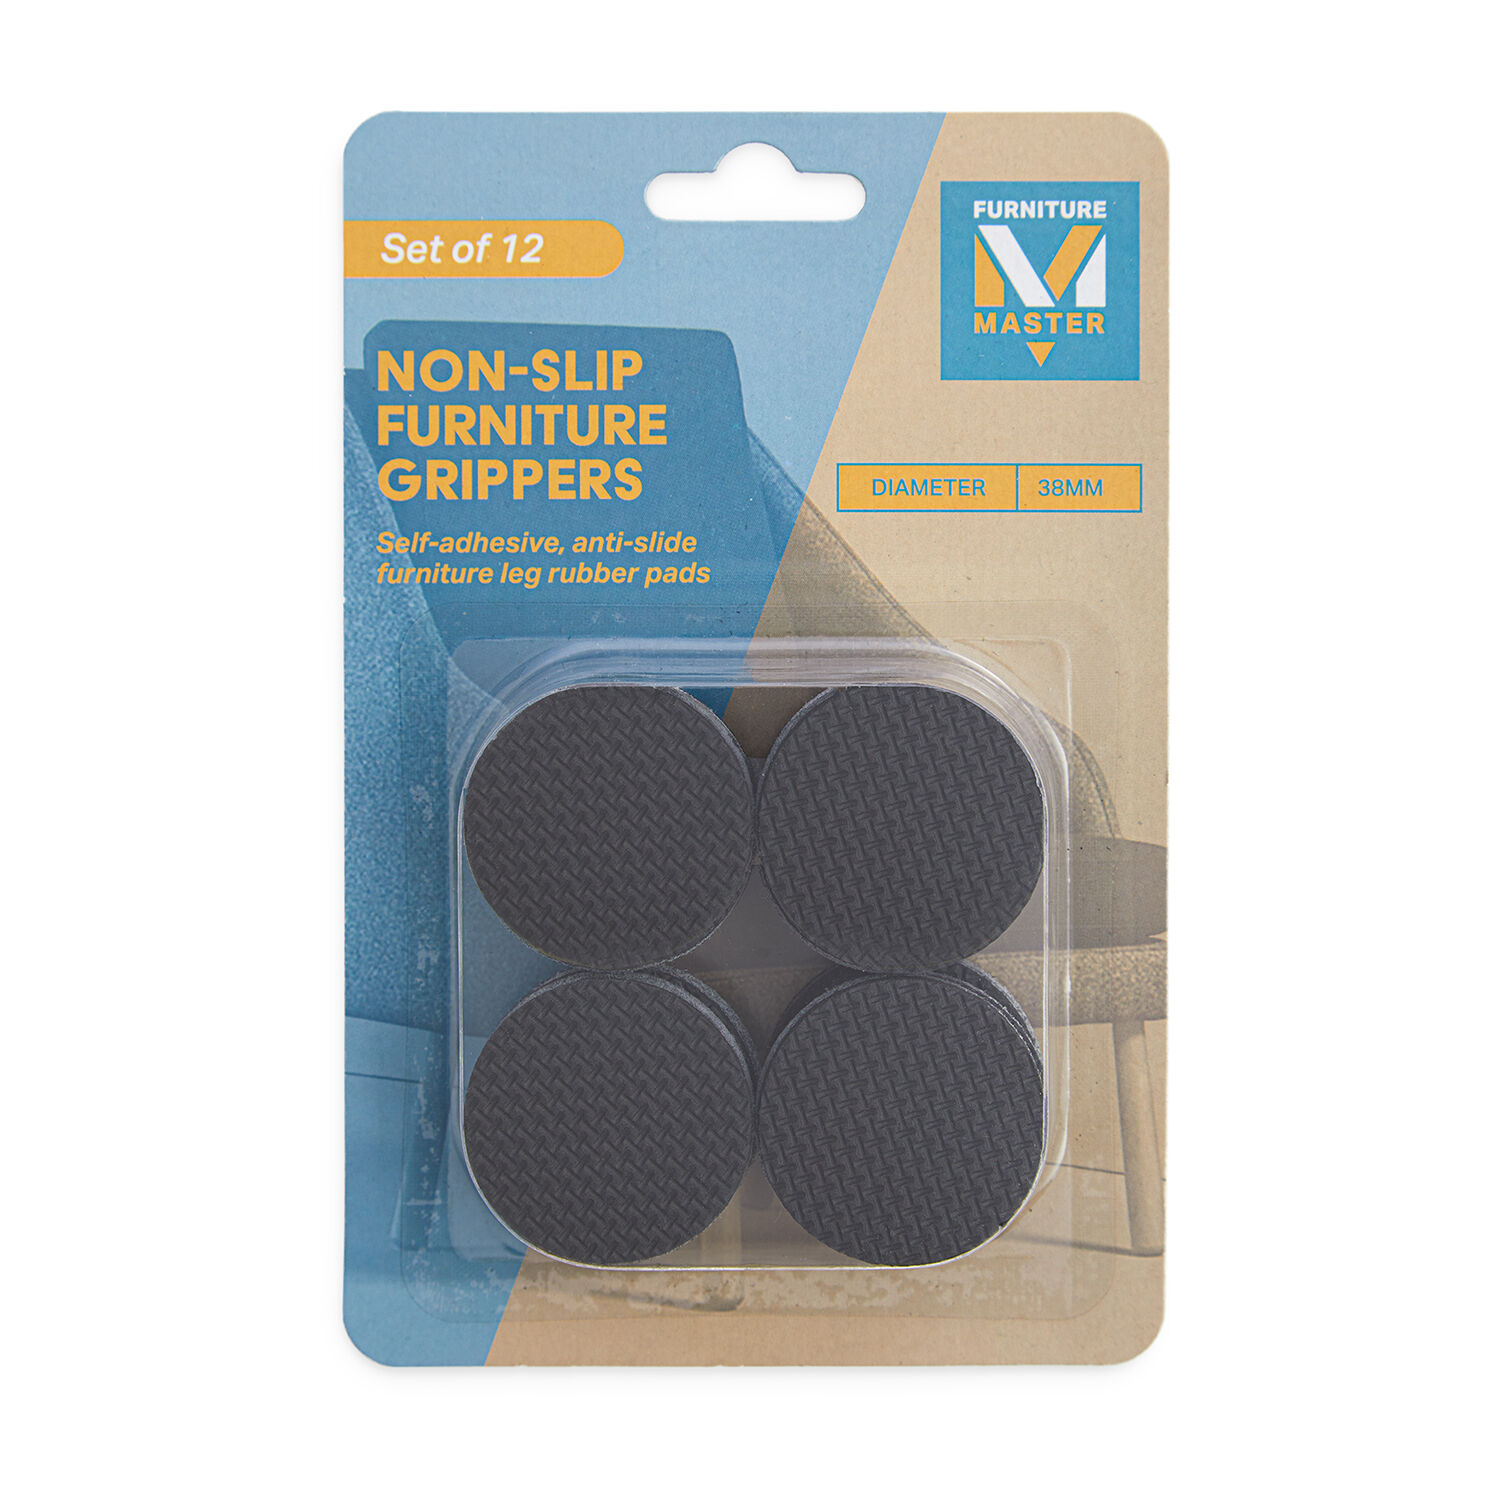 Non-slip Furniture Pads, 10 Sheets Rubber Furniture Stoppers For Furniture  To Prevent Sliding, Non-slip Furniture Feet Grippers, Chair Leg Floor Prote